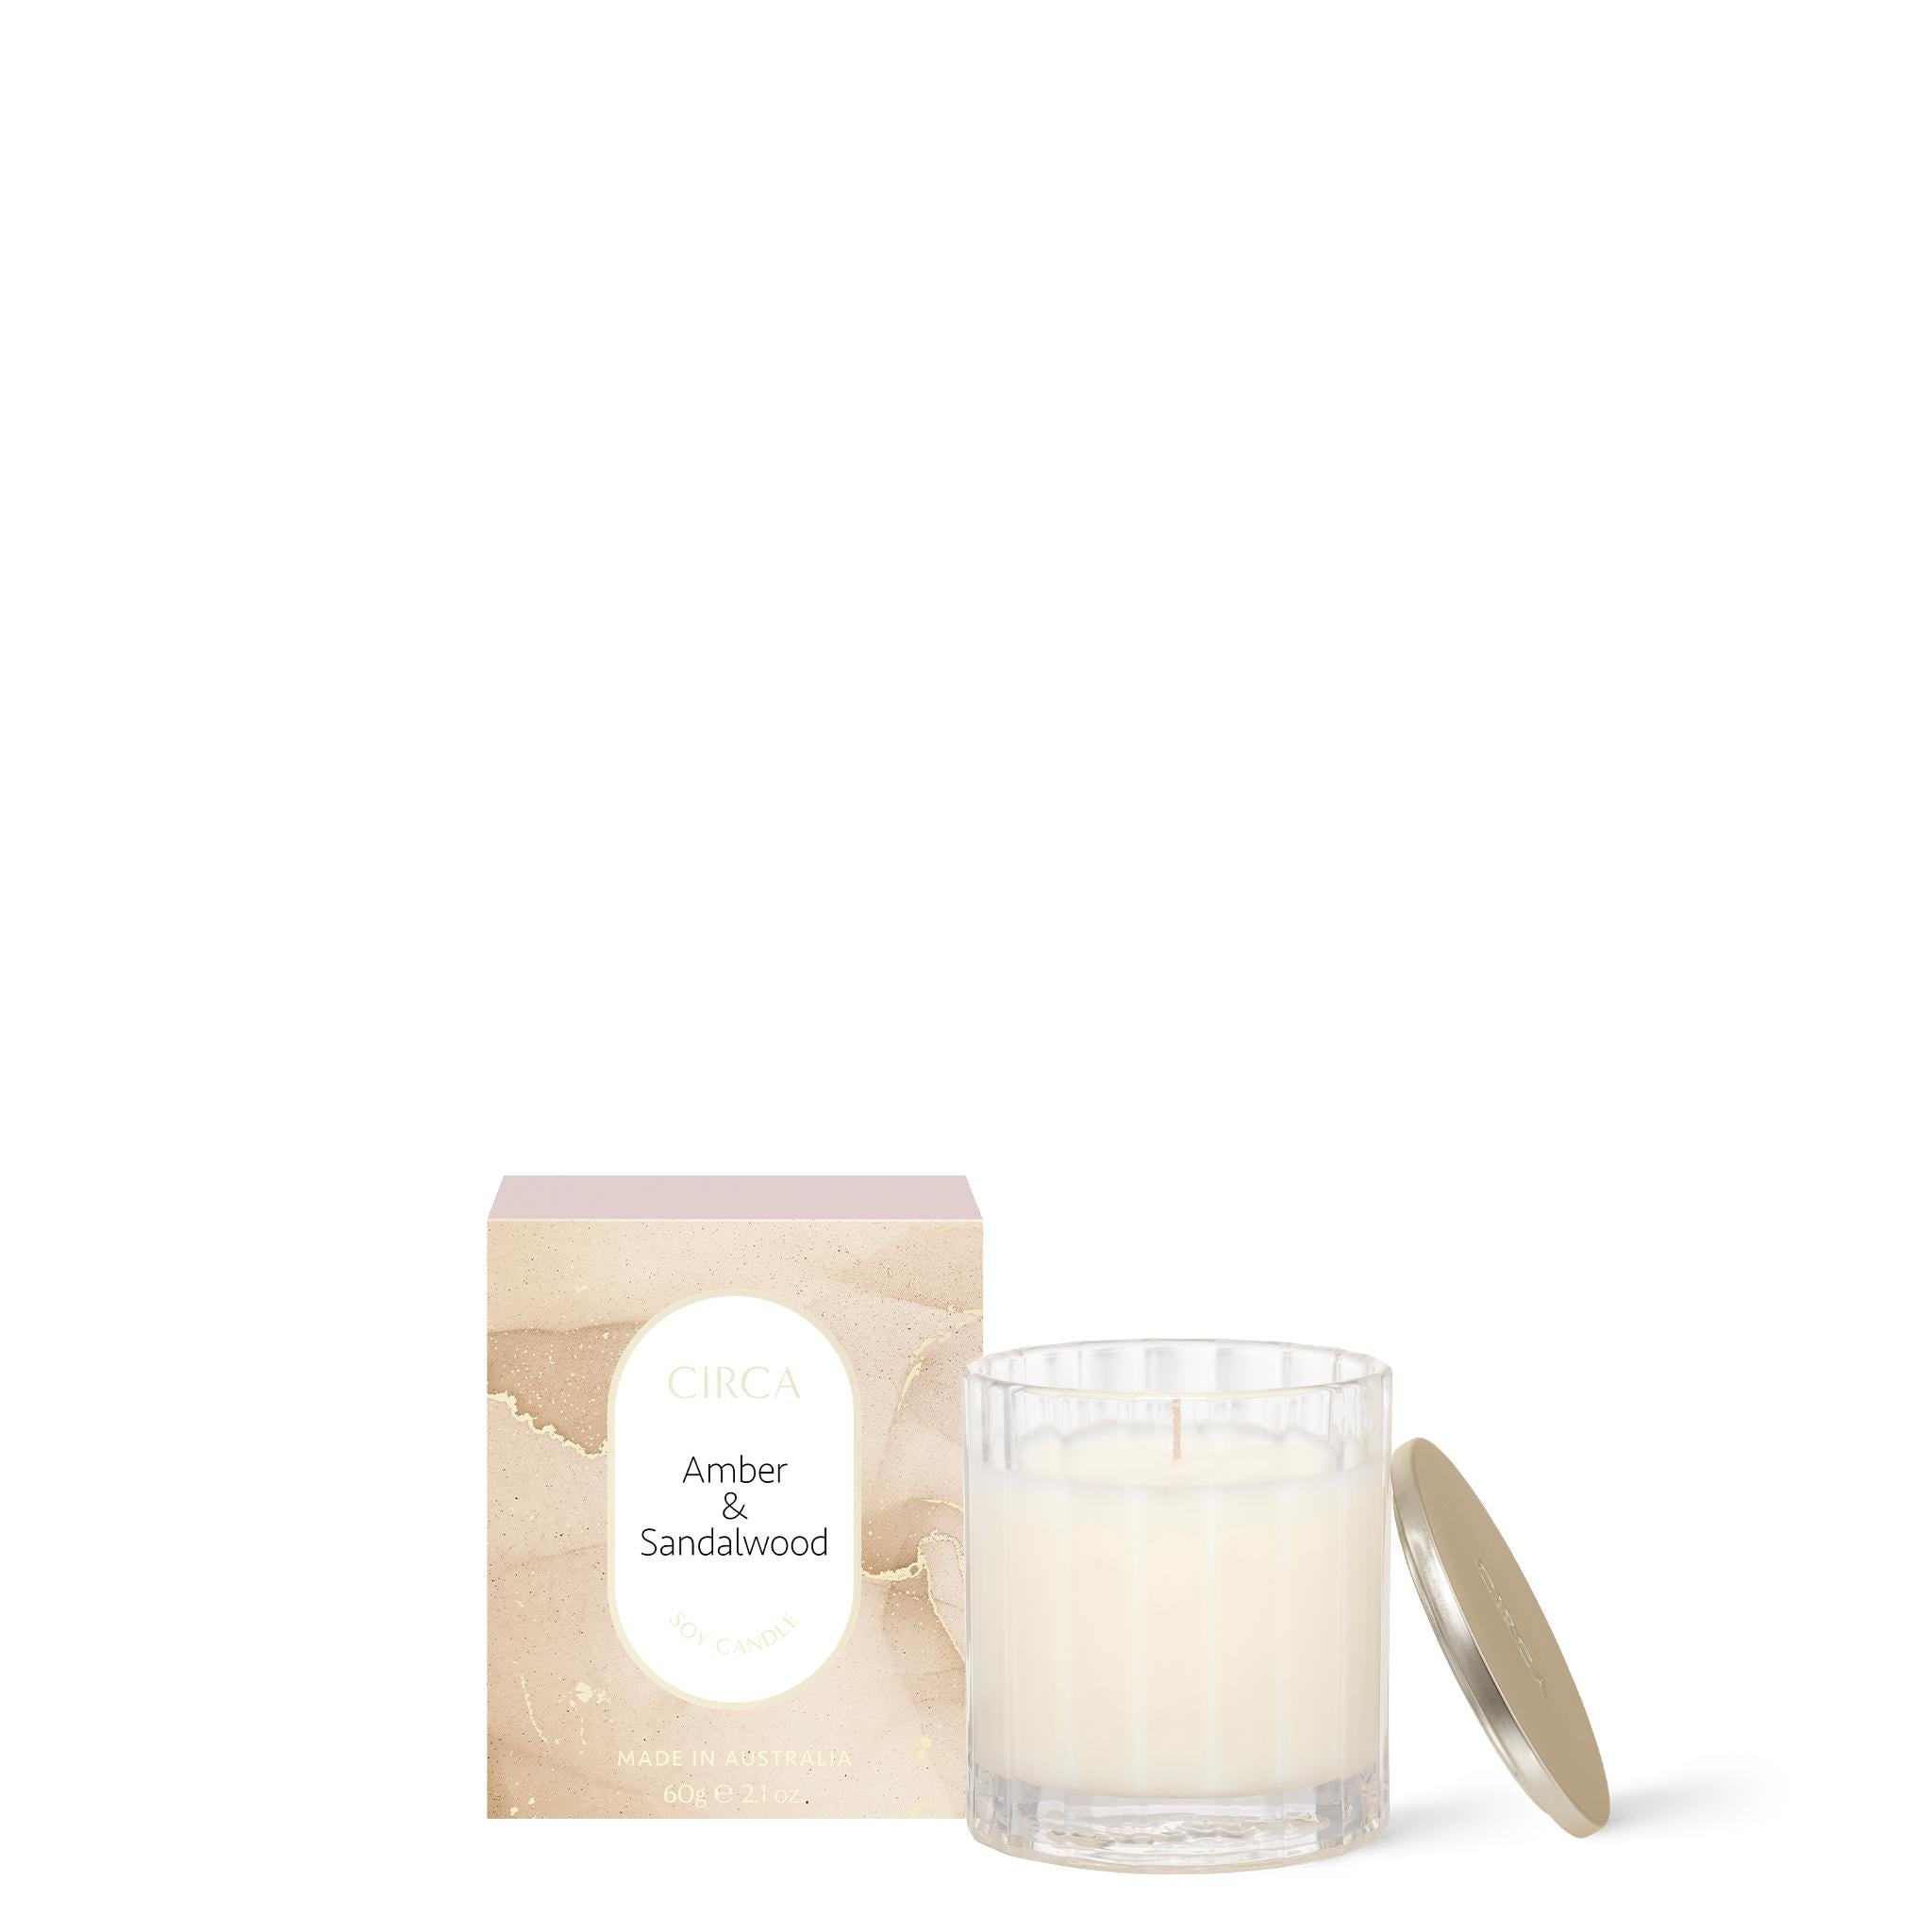 Soy Candle 60g - Asst Fragrance-Candles & Fragrance-Circa-Amber & Sandalwood-The Bay Room